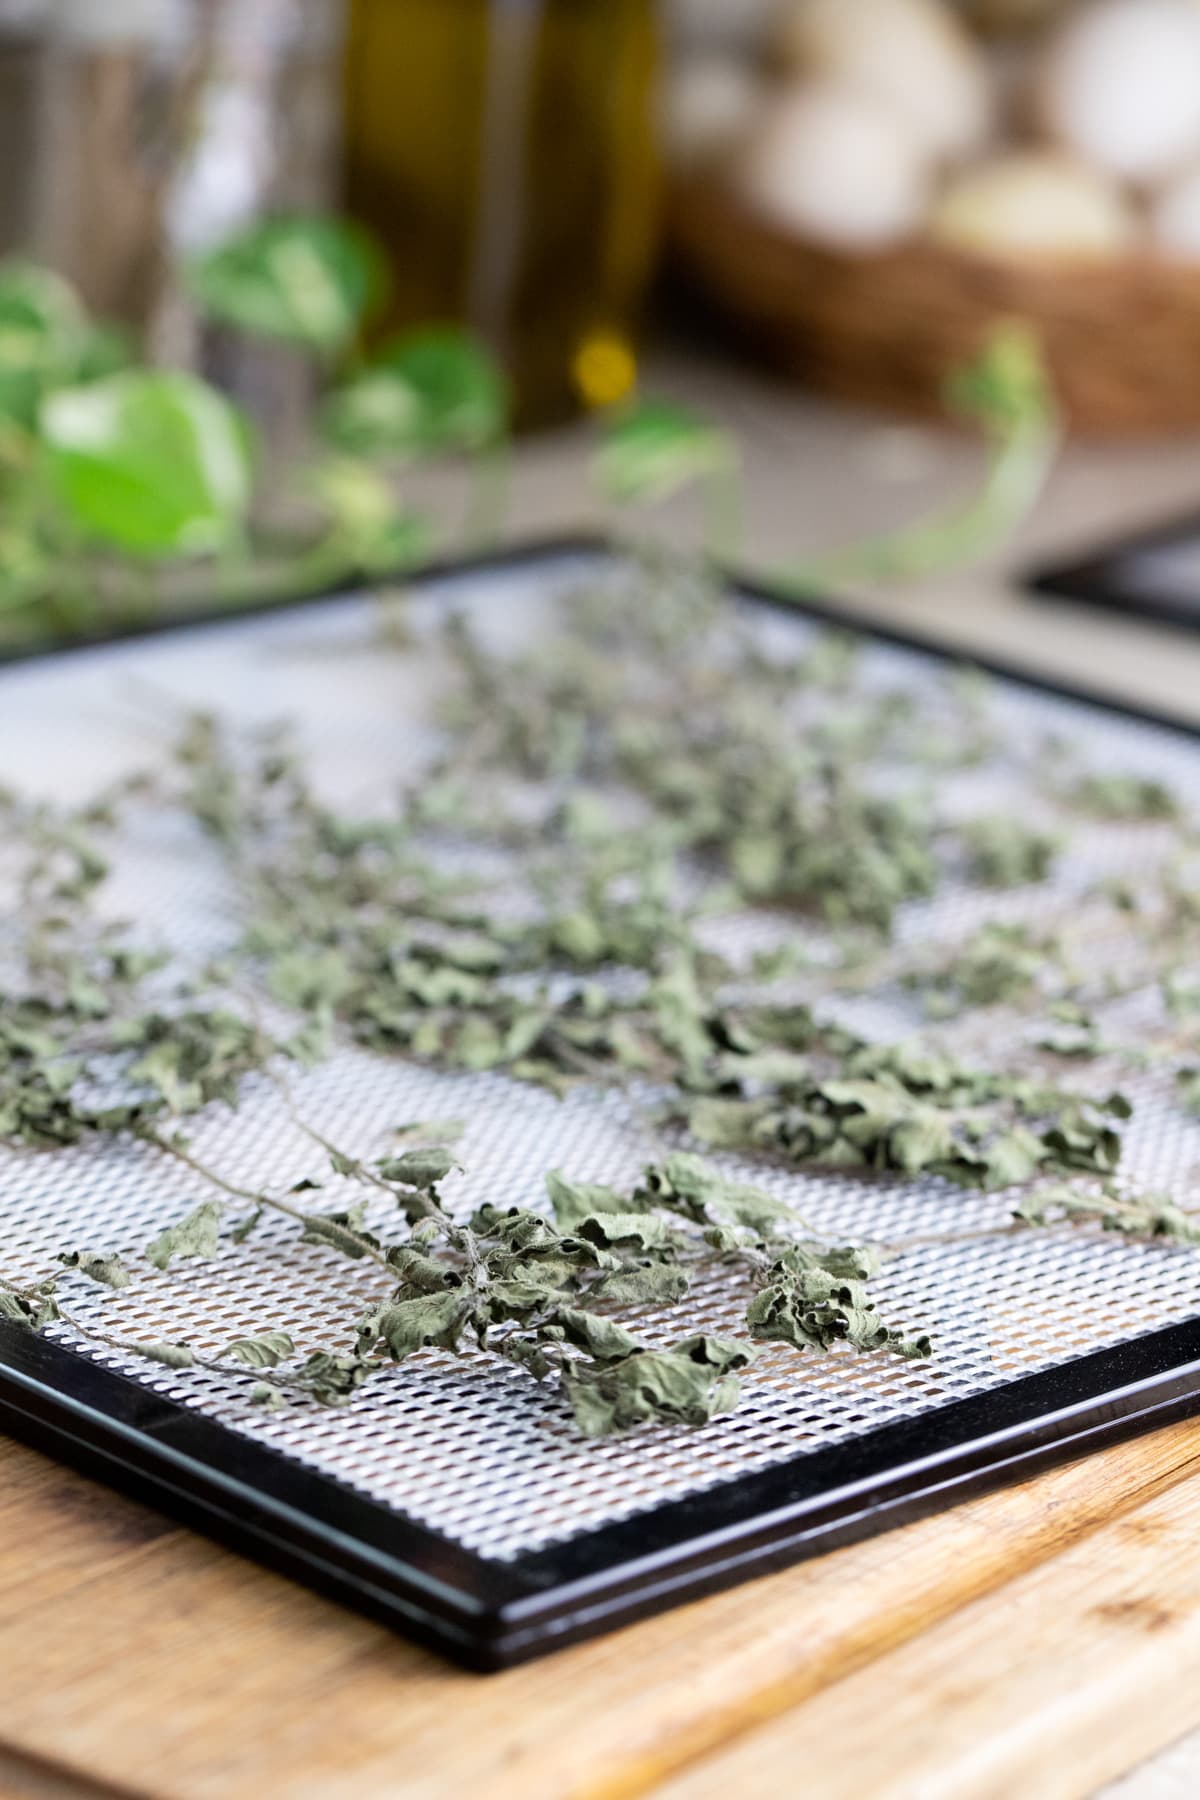 dry oregano on the try of the dehydrator